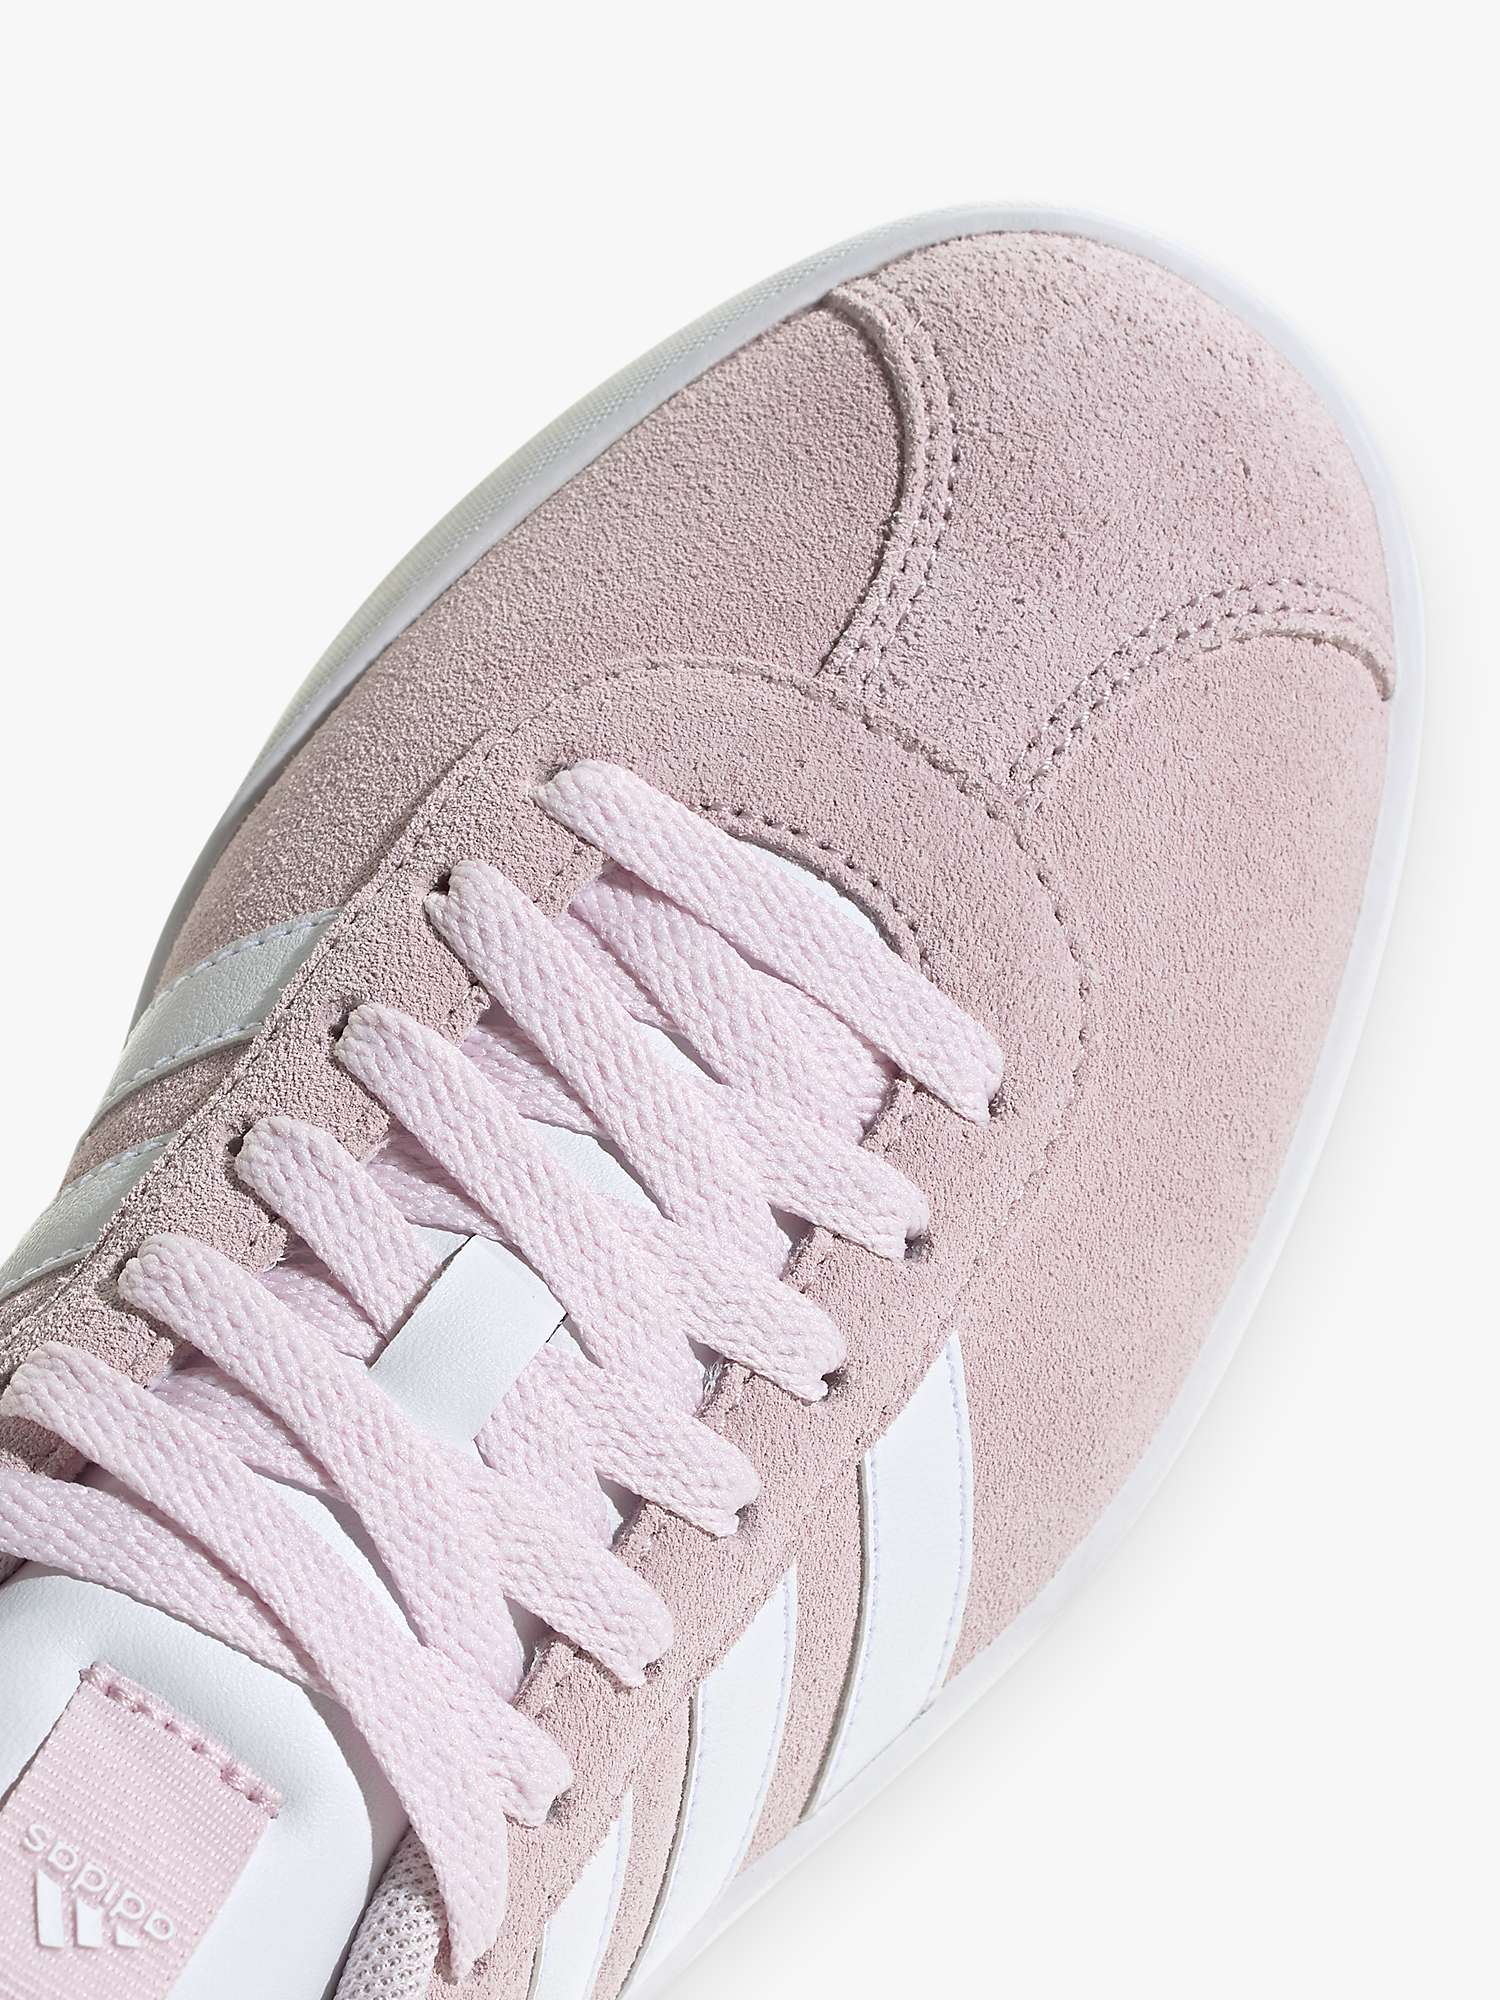 Buy adidas VL Court Suede Trainers, Pink/White Online at johnlewis.com